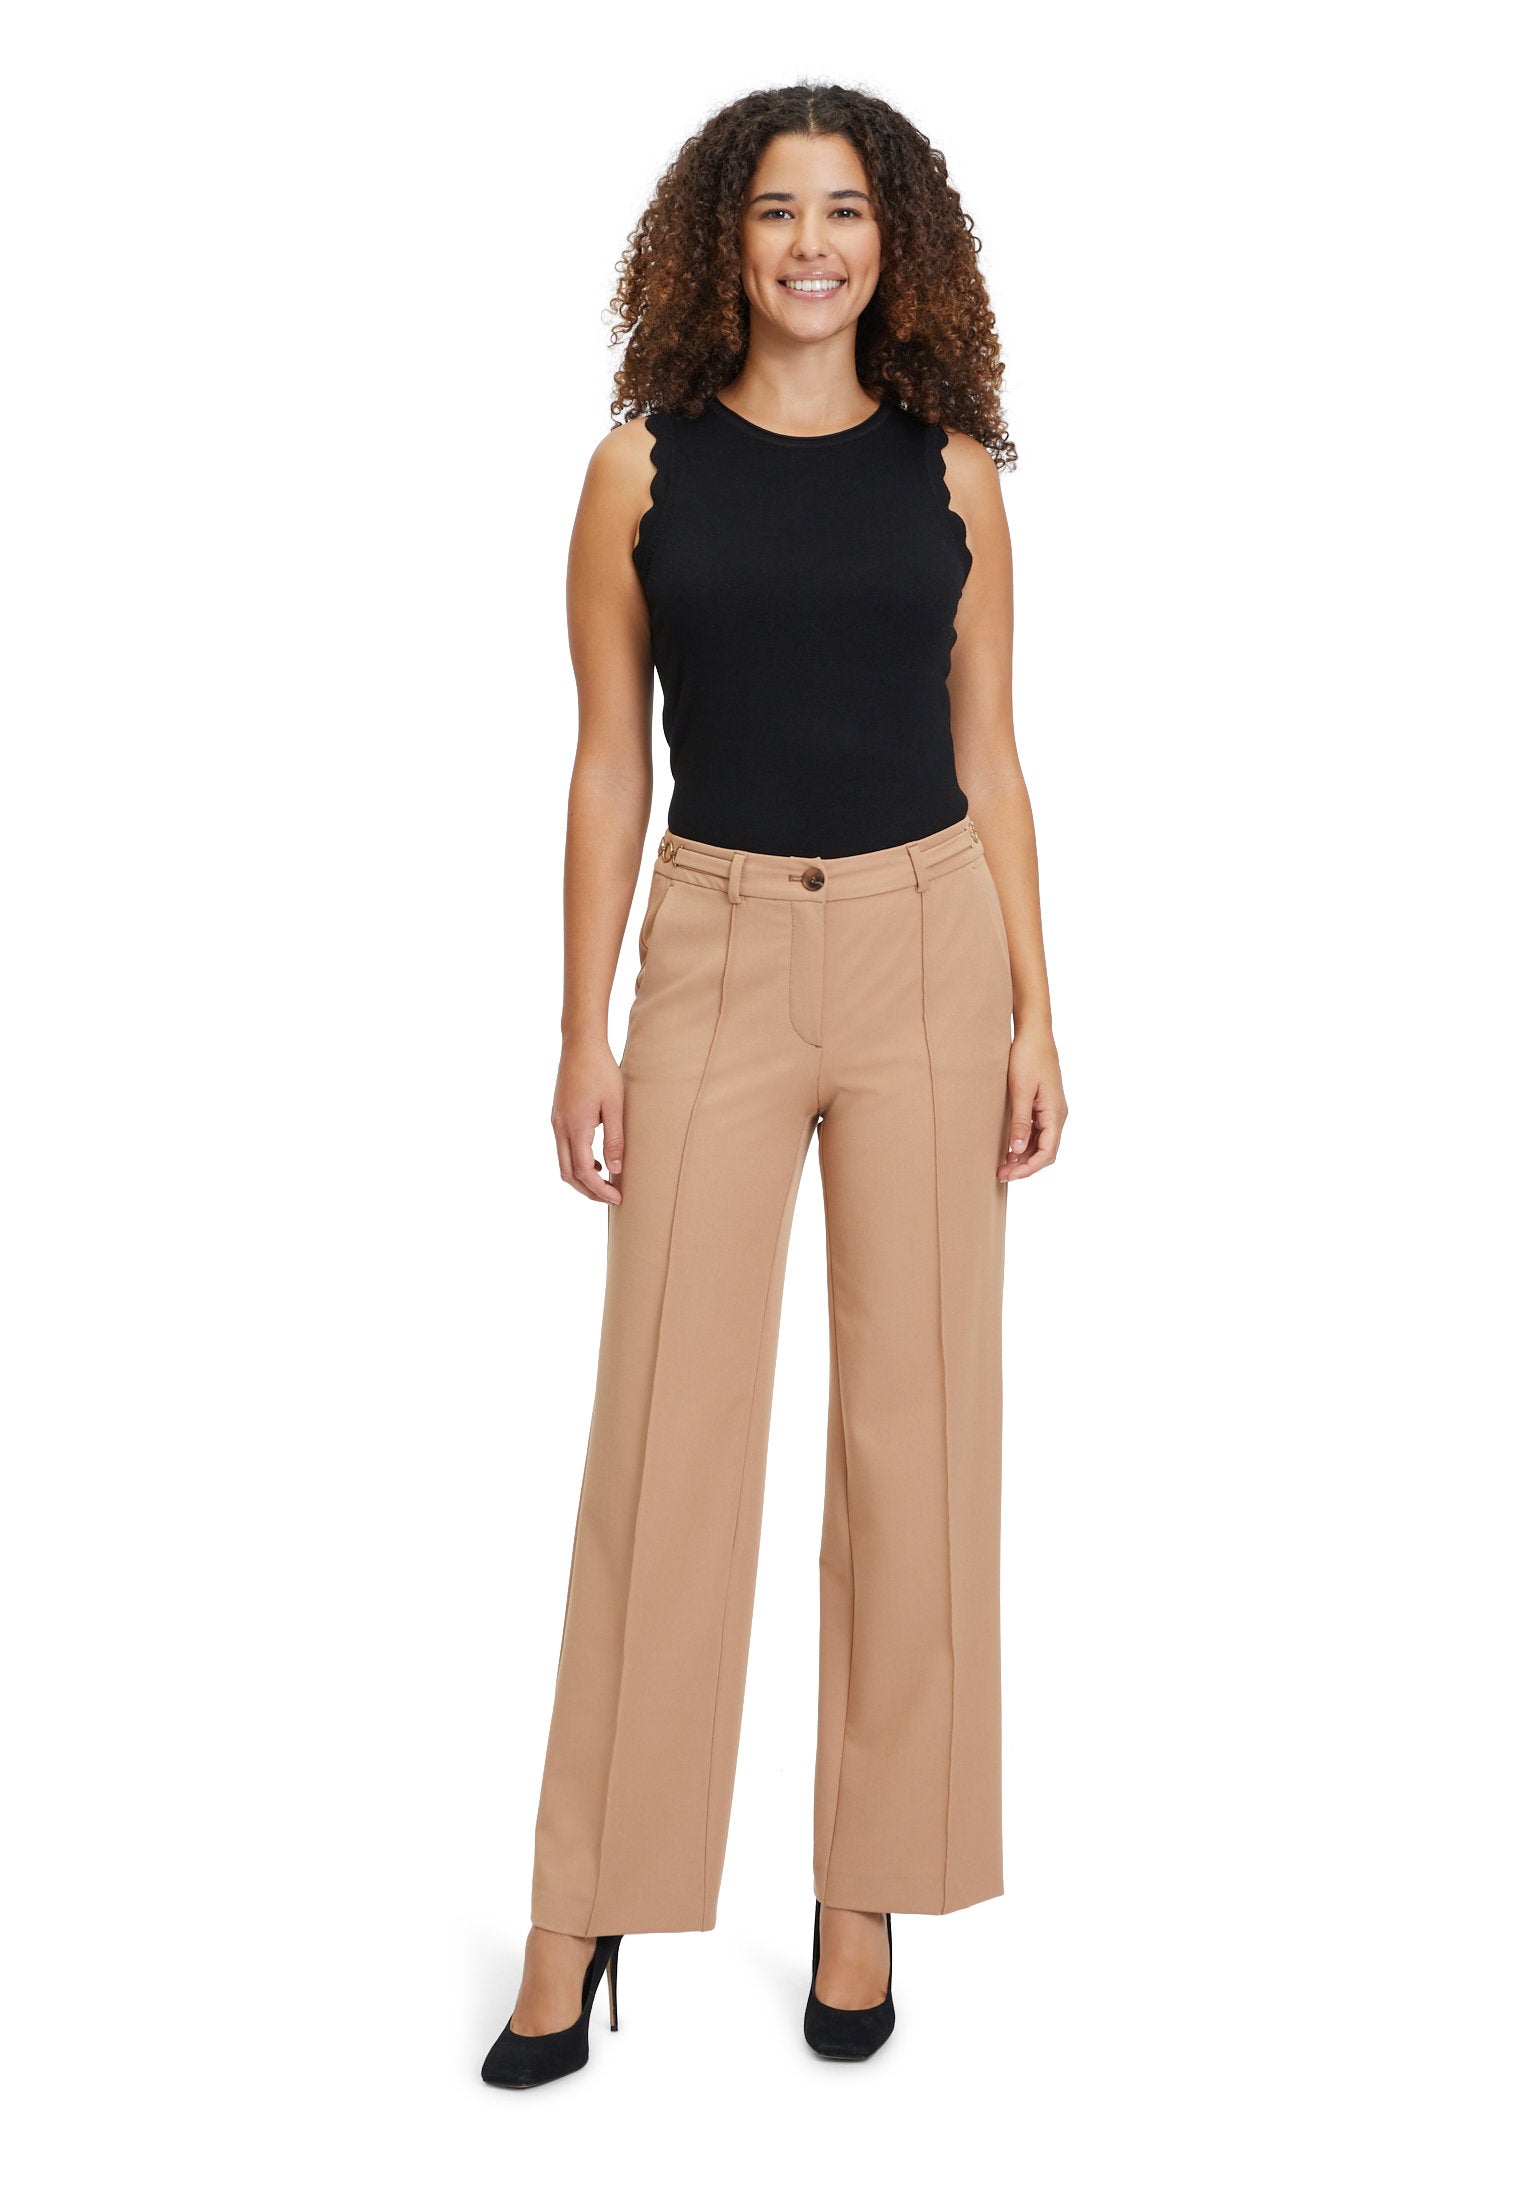 Beige Dress Trousers With Center Pleat_6831-1055_7030_05